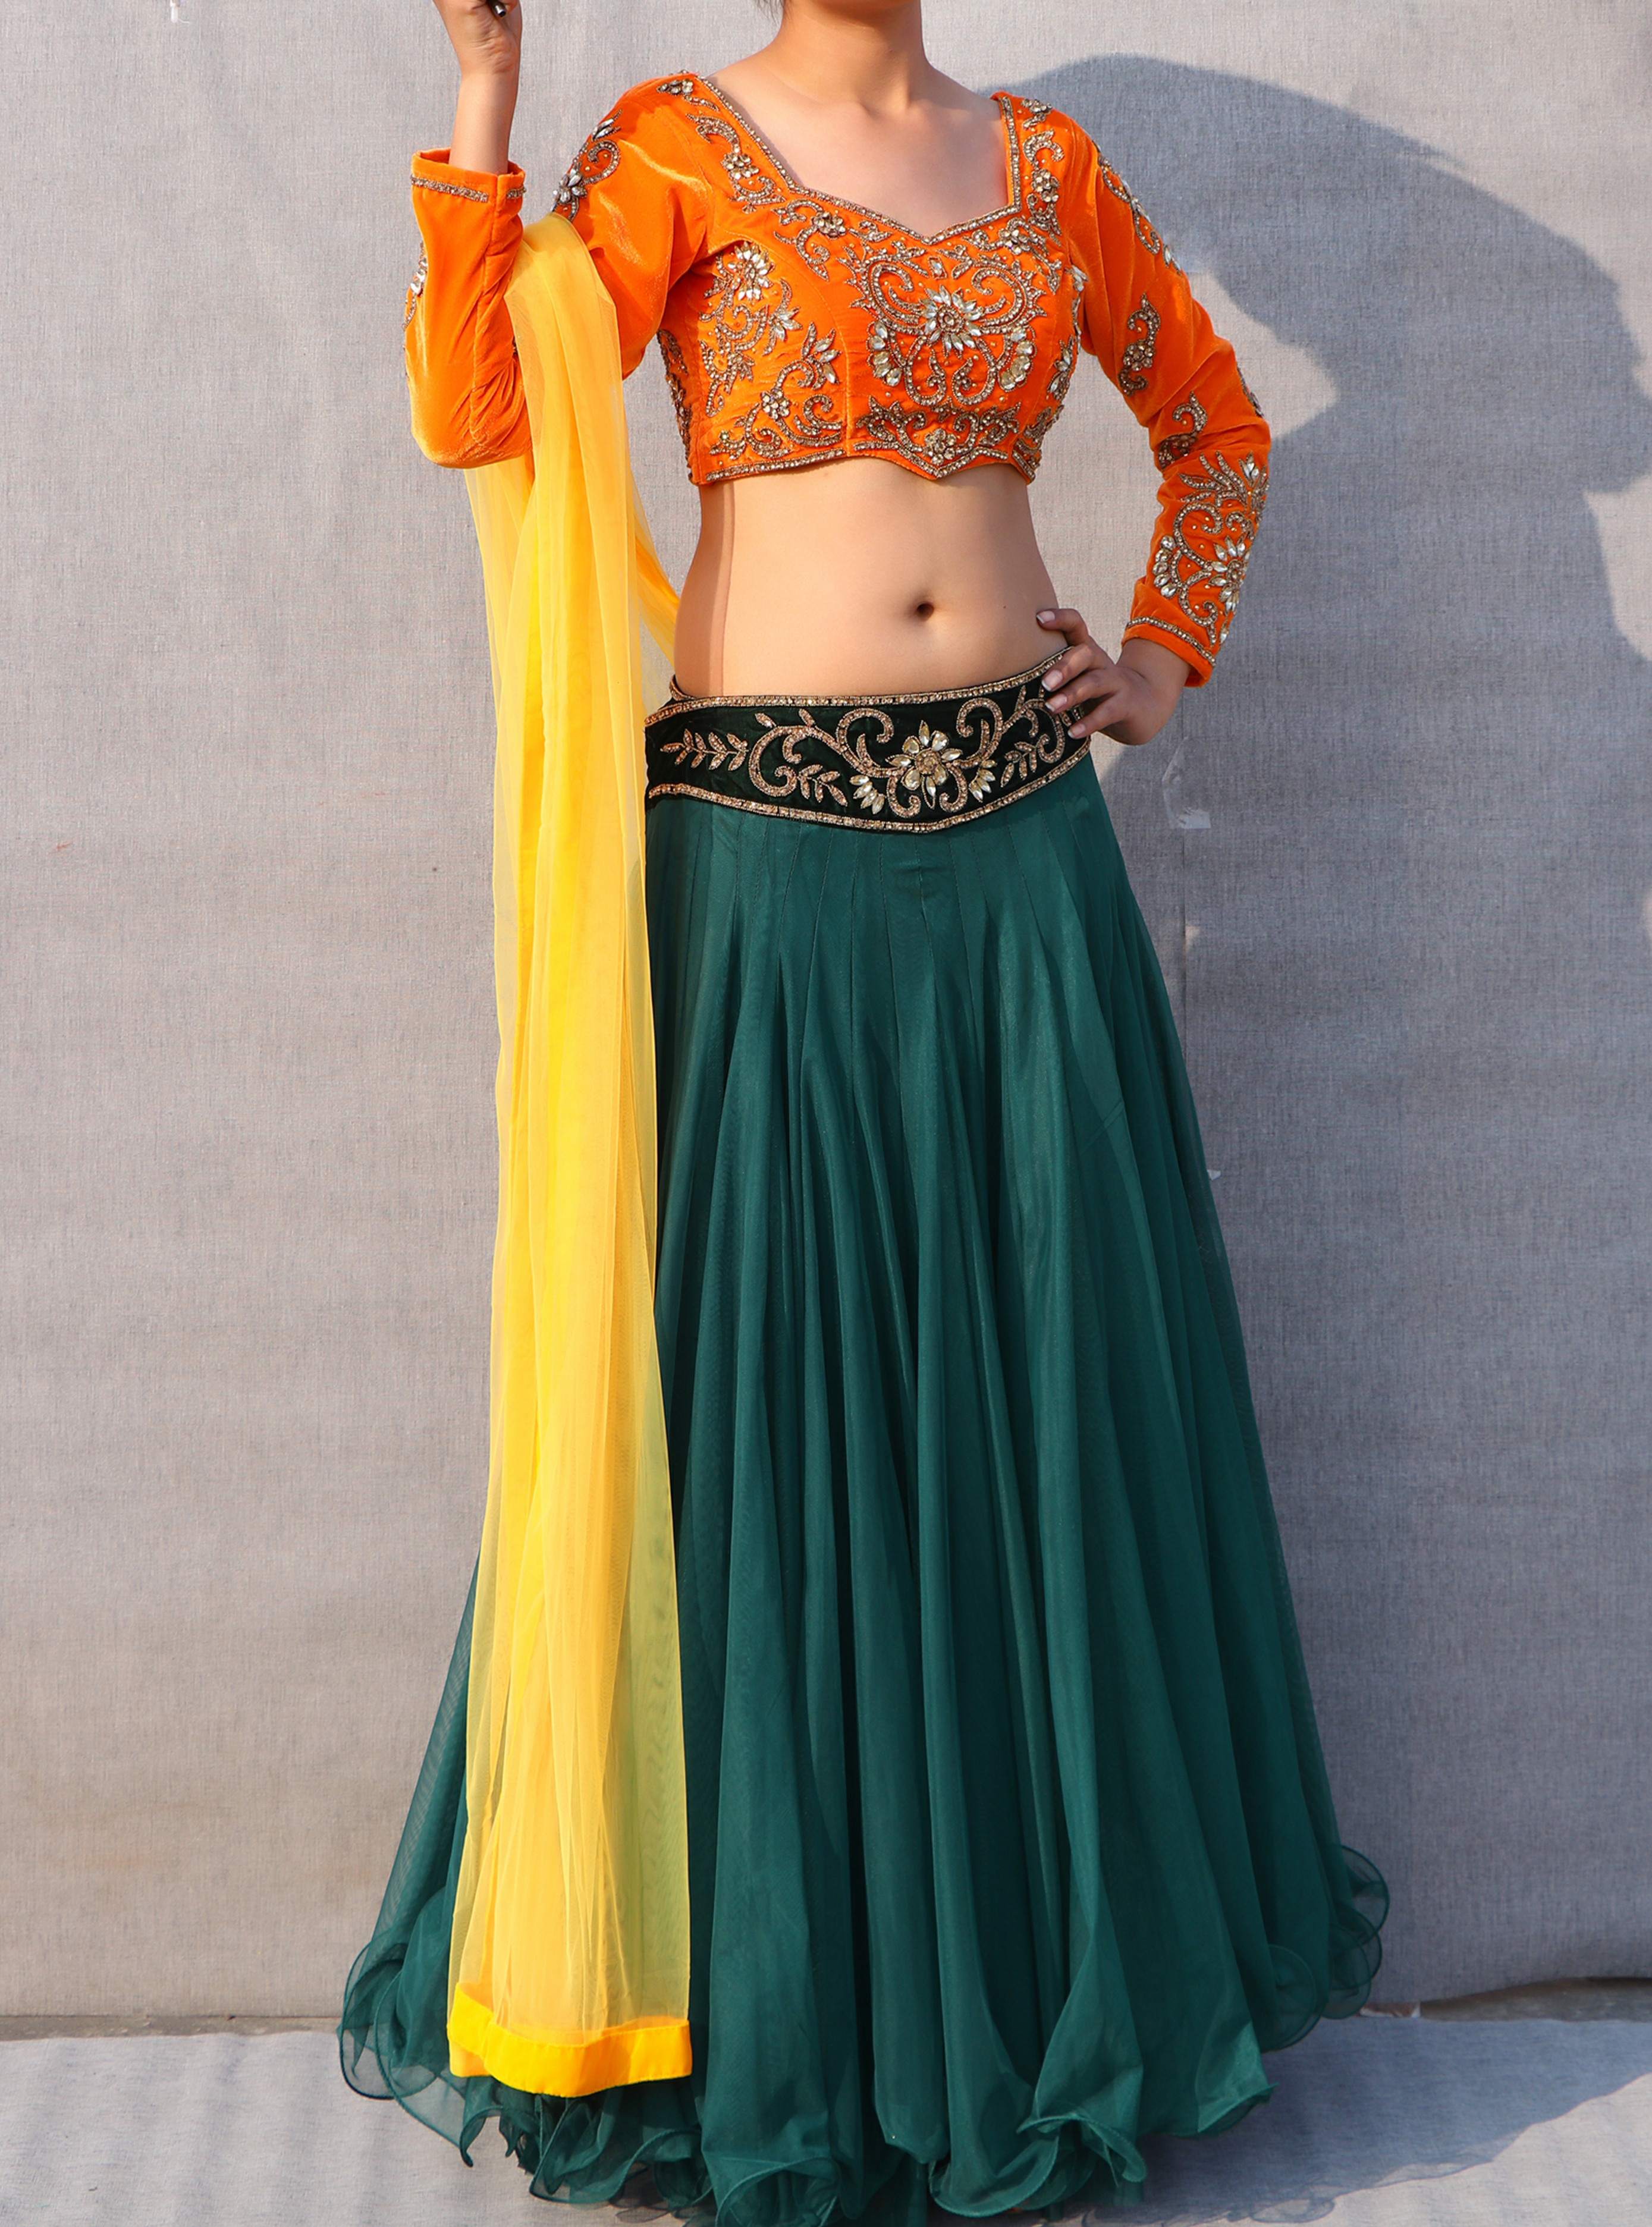 Green Orange Color Lehenga With Full Sleeve Designer Blouse In Embroidery And Stone Handmade Work